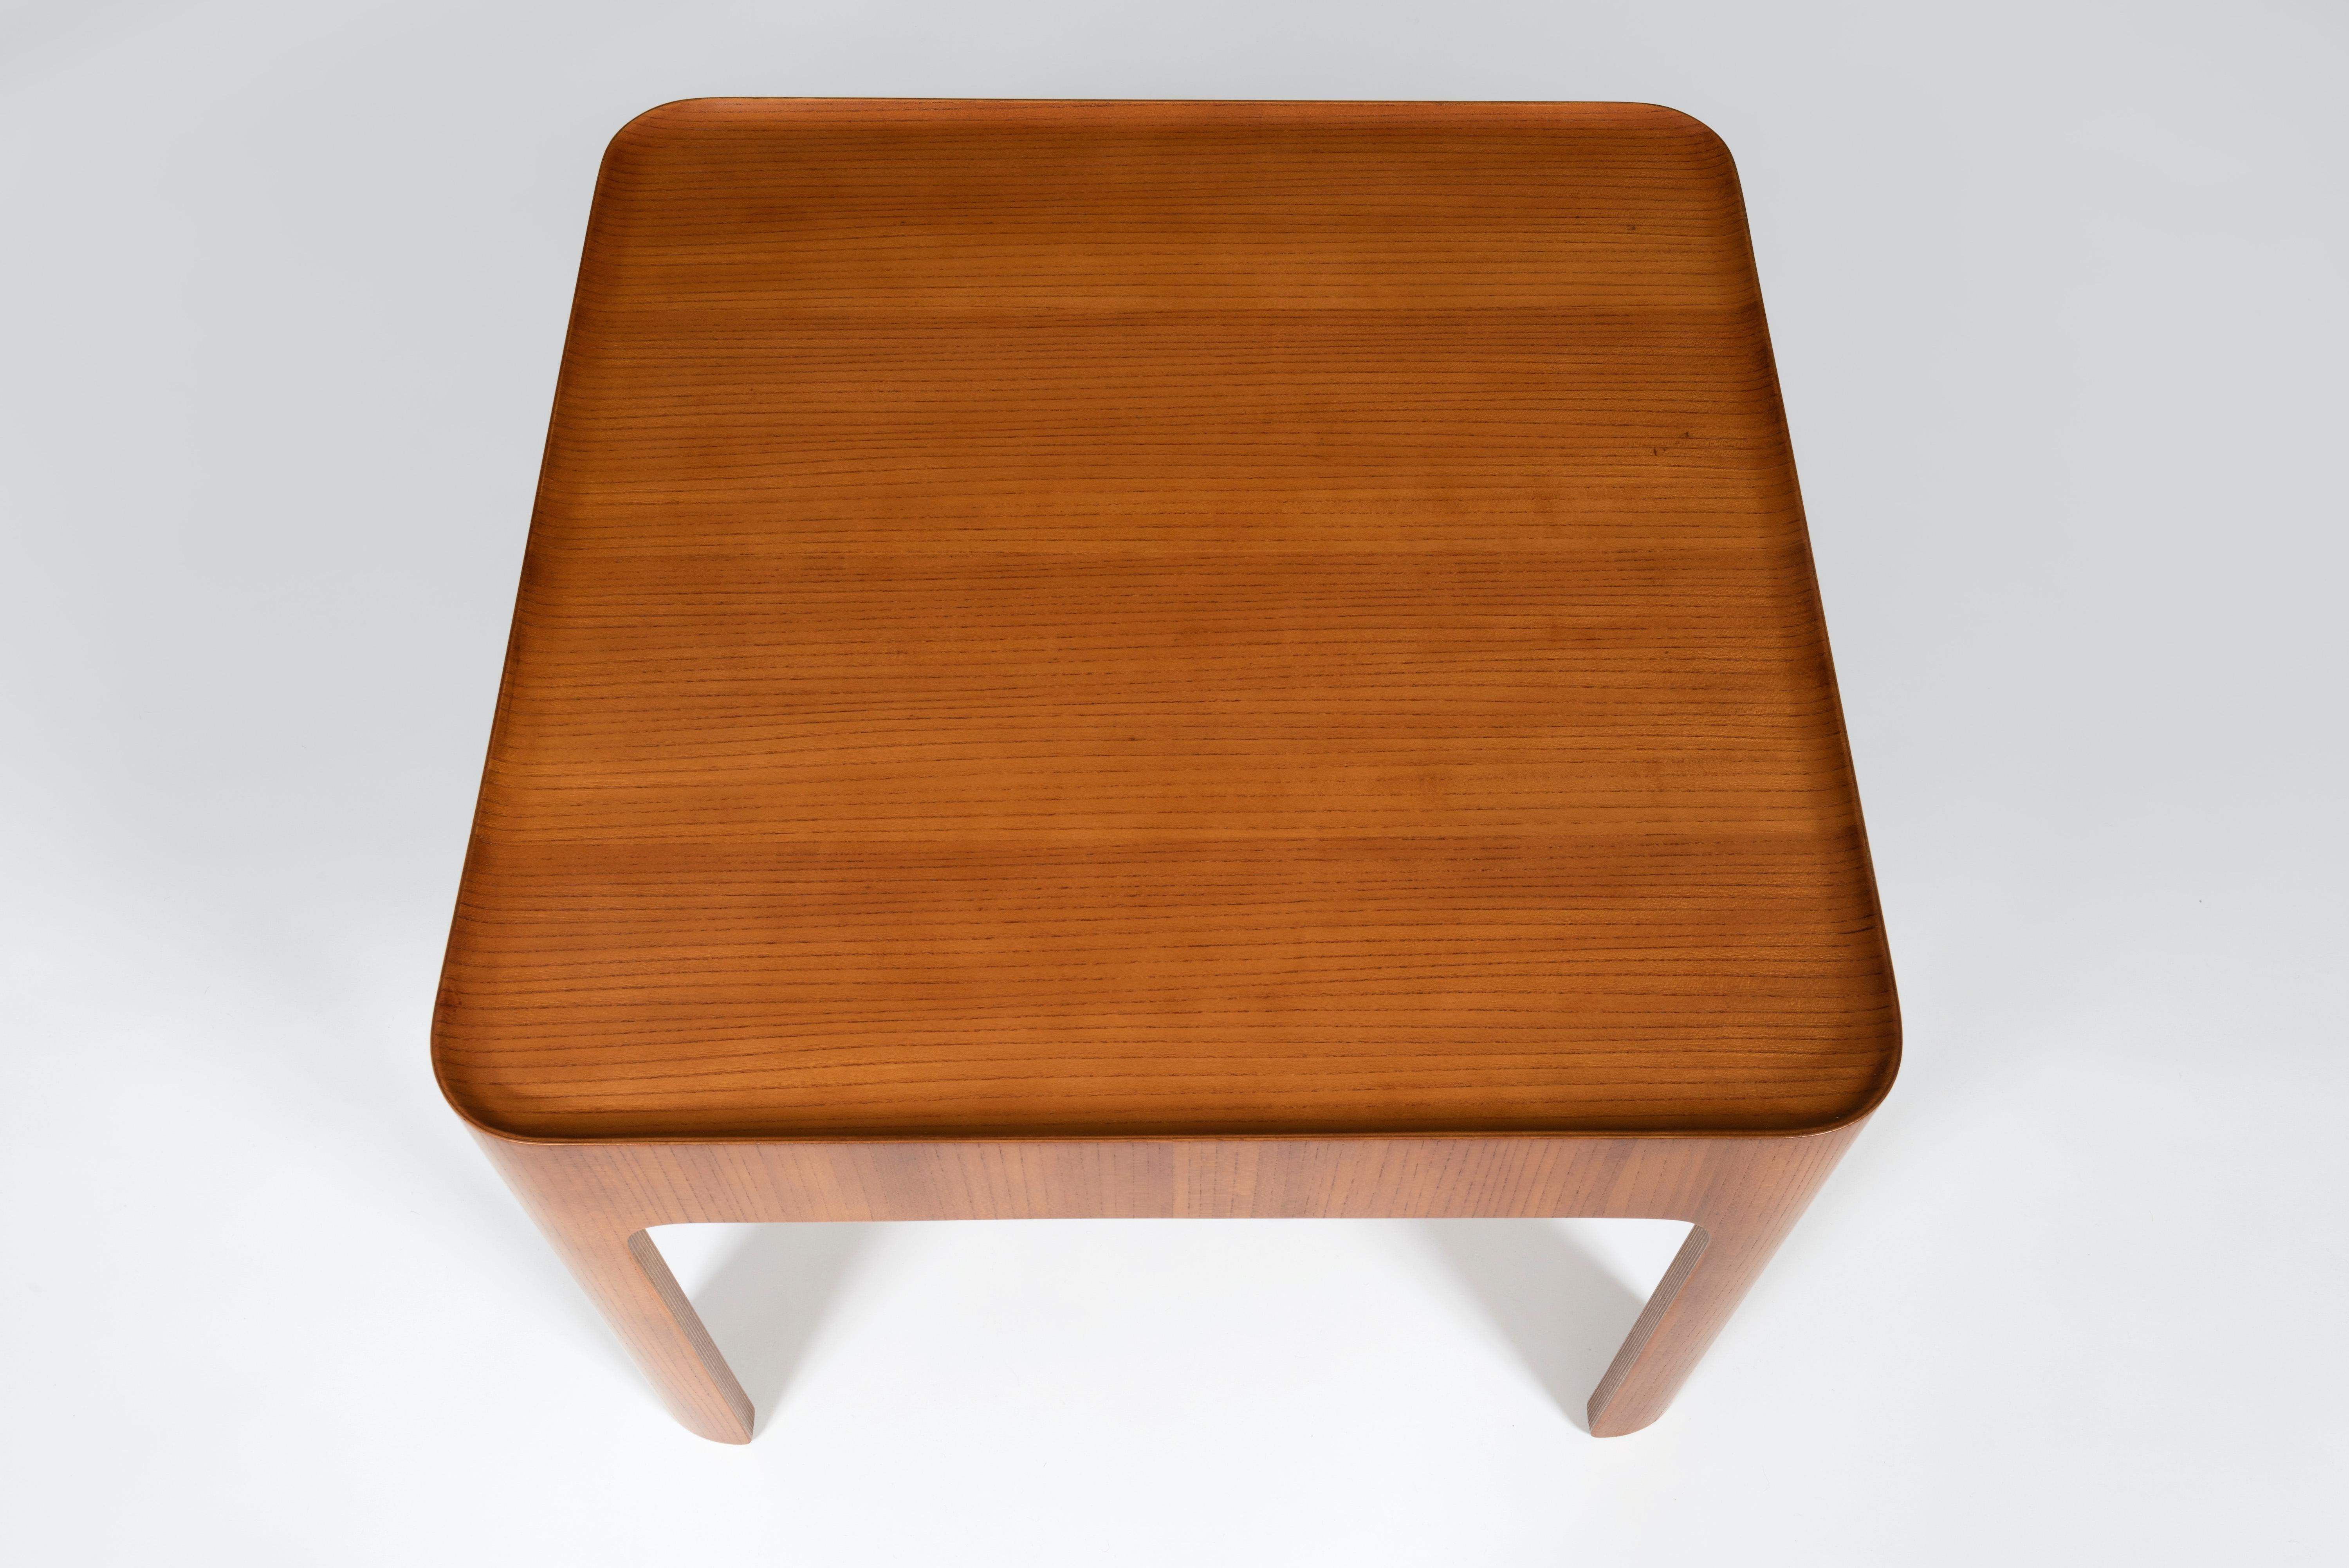 Coffee table designed by Isamu Kenmochi manufactured by Tendo Mokko in Japan, circa 1967. In good original condition with minor wear consistent with age and use, preserving a beautiful patina.
Isamu Kenmochi (1912 -1971) was a Japanese modernist